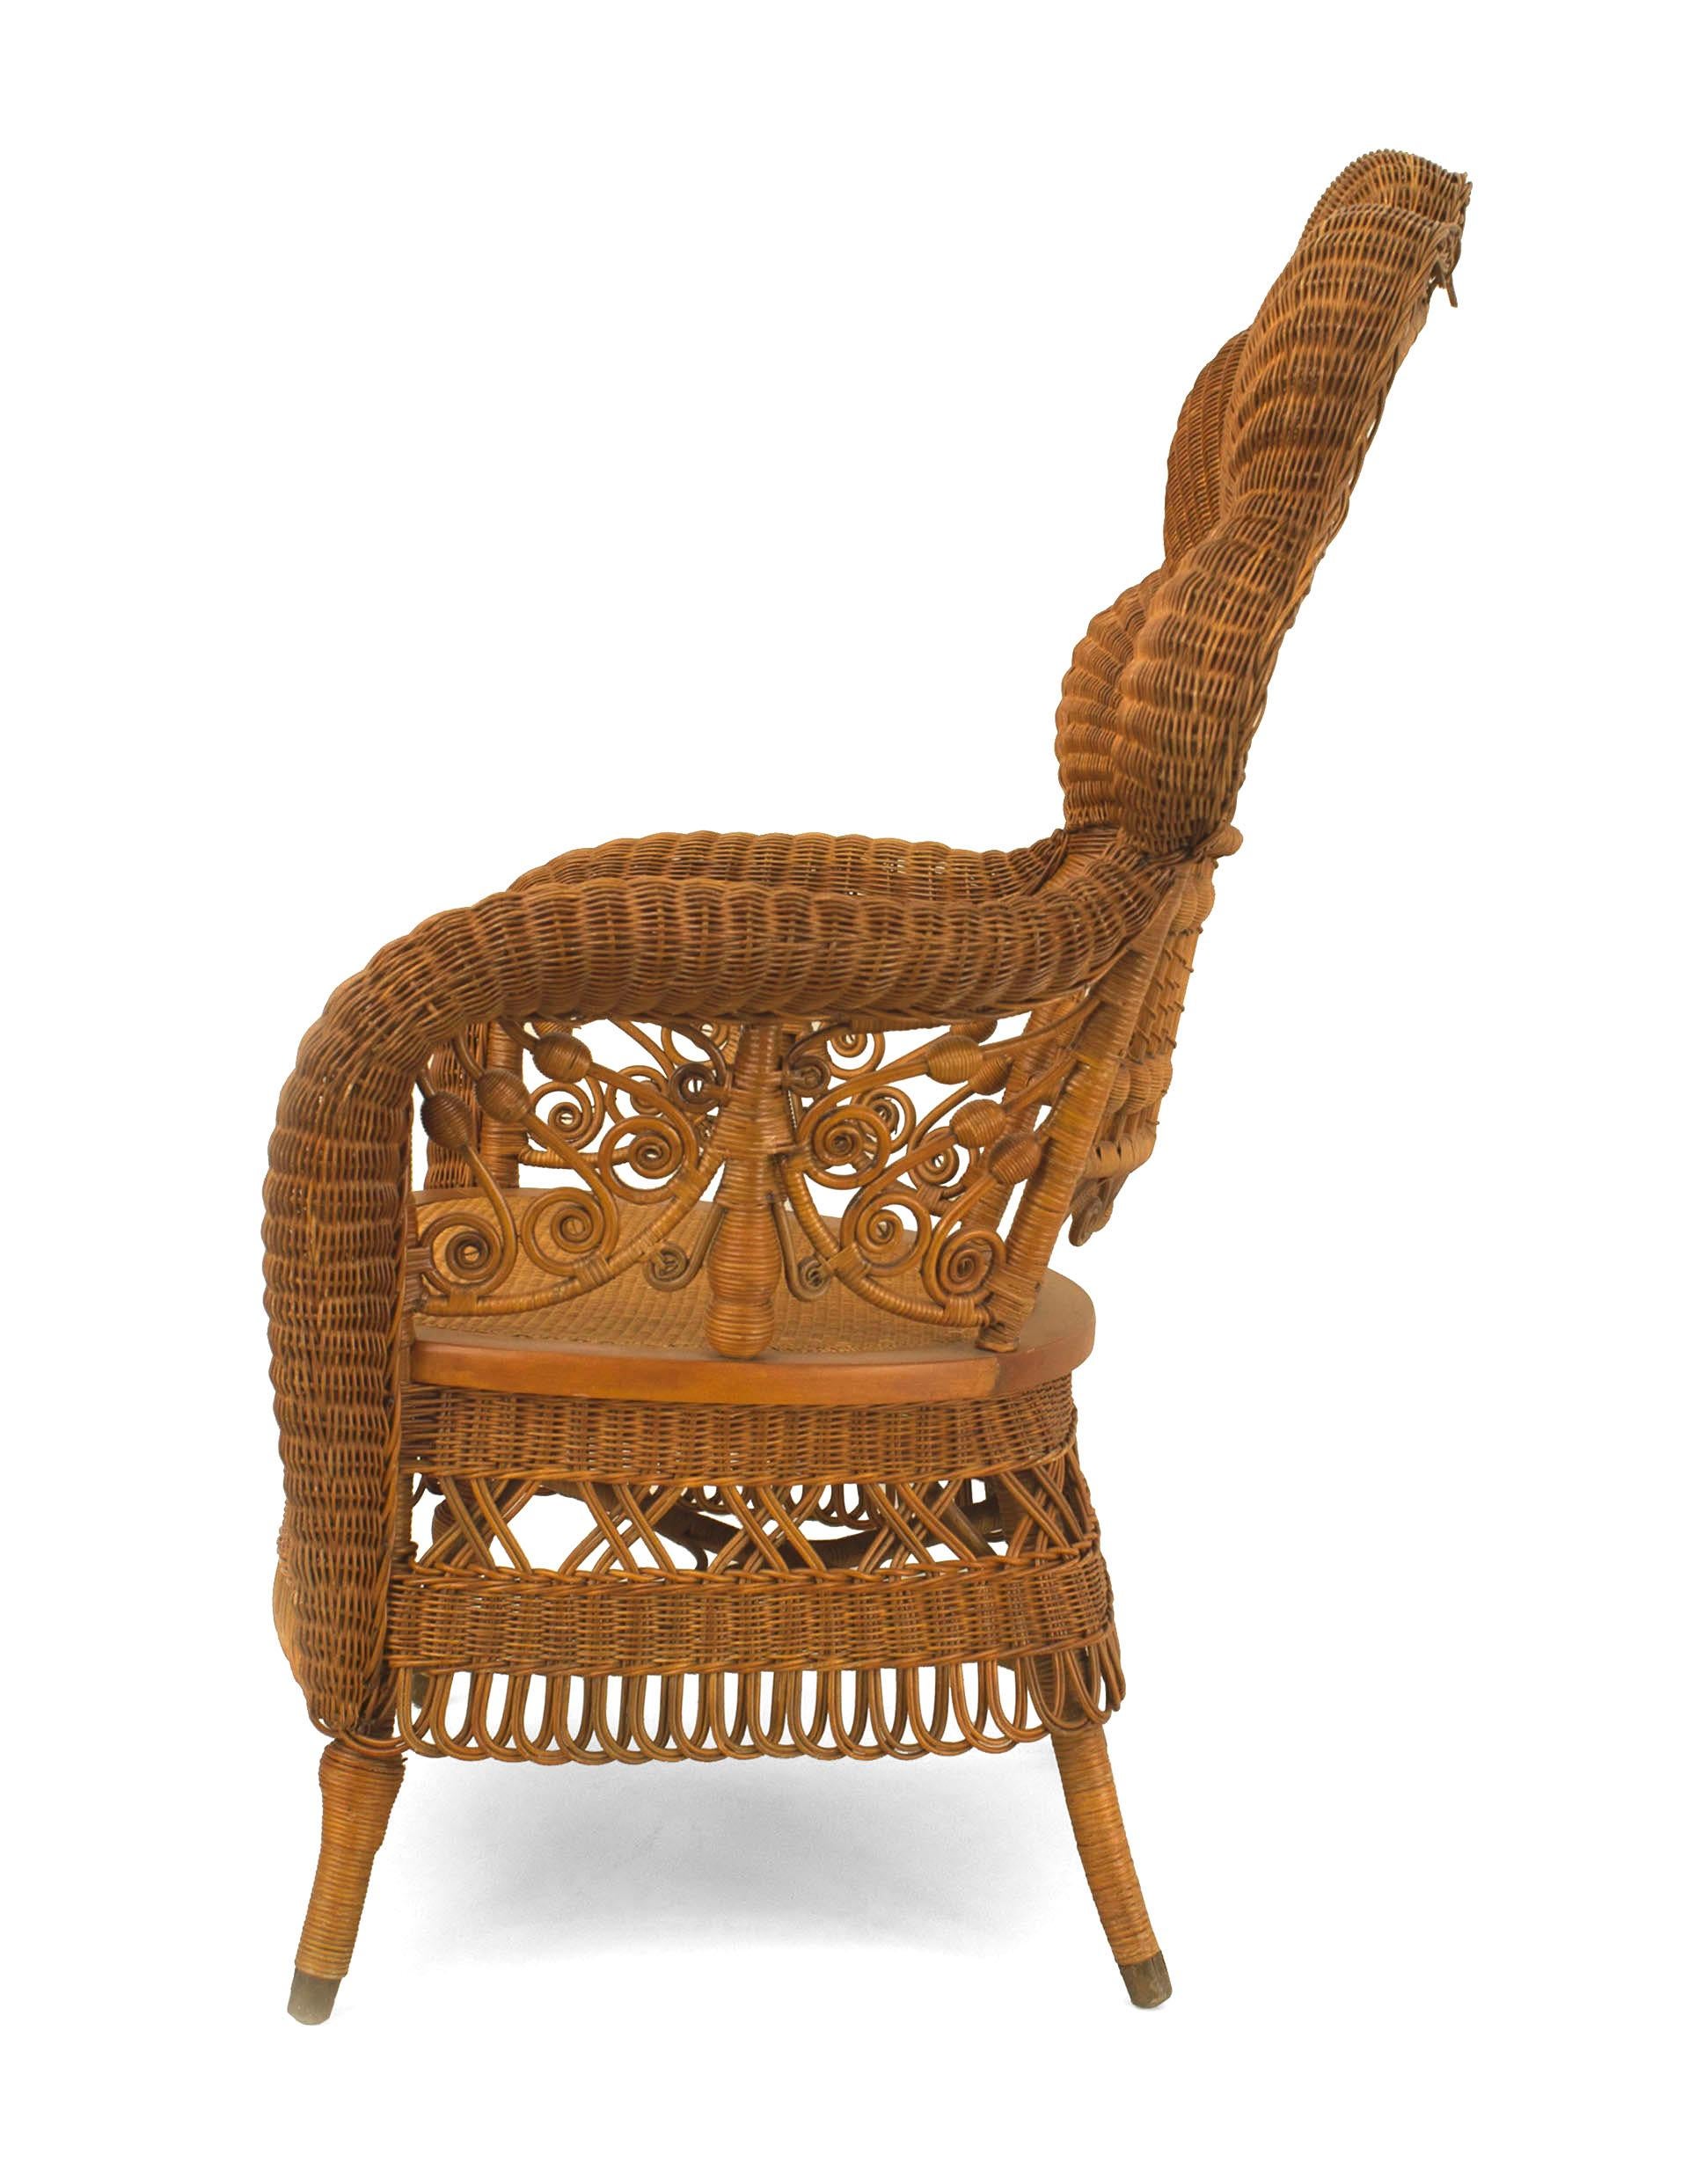 Rustic American Victorian Natural Wicker Arm Chair For Sale